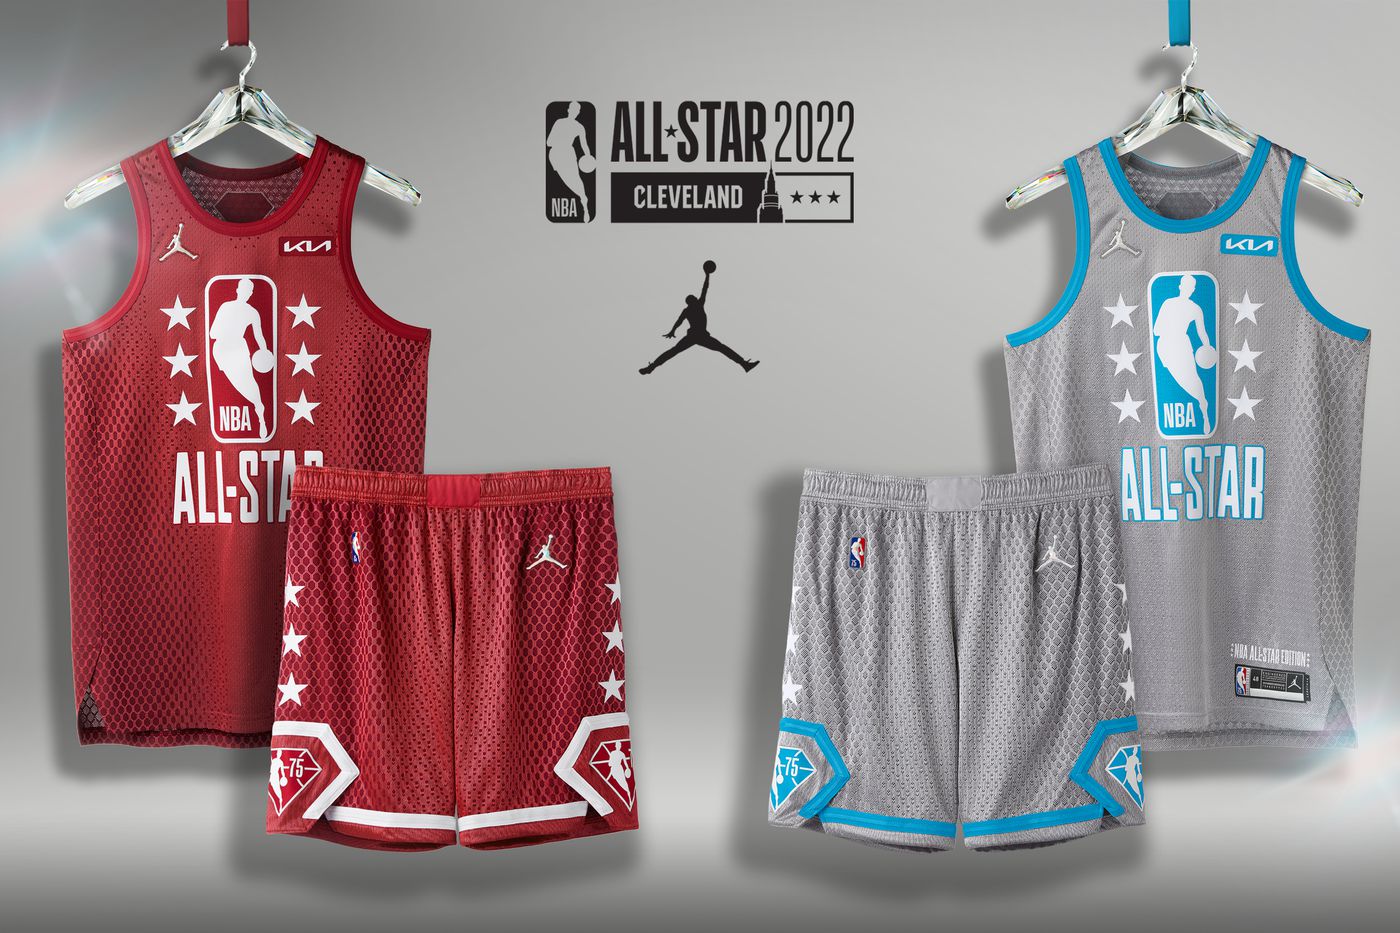 NBA All-Star jerseys 2022: These might be the worst uniforms to date 